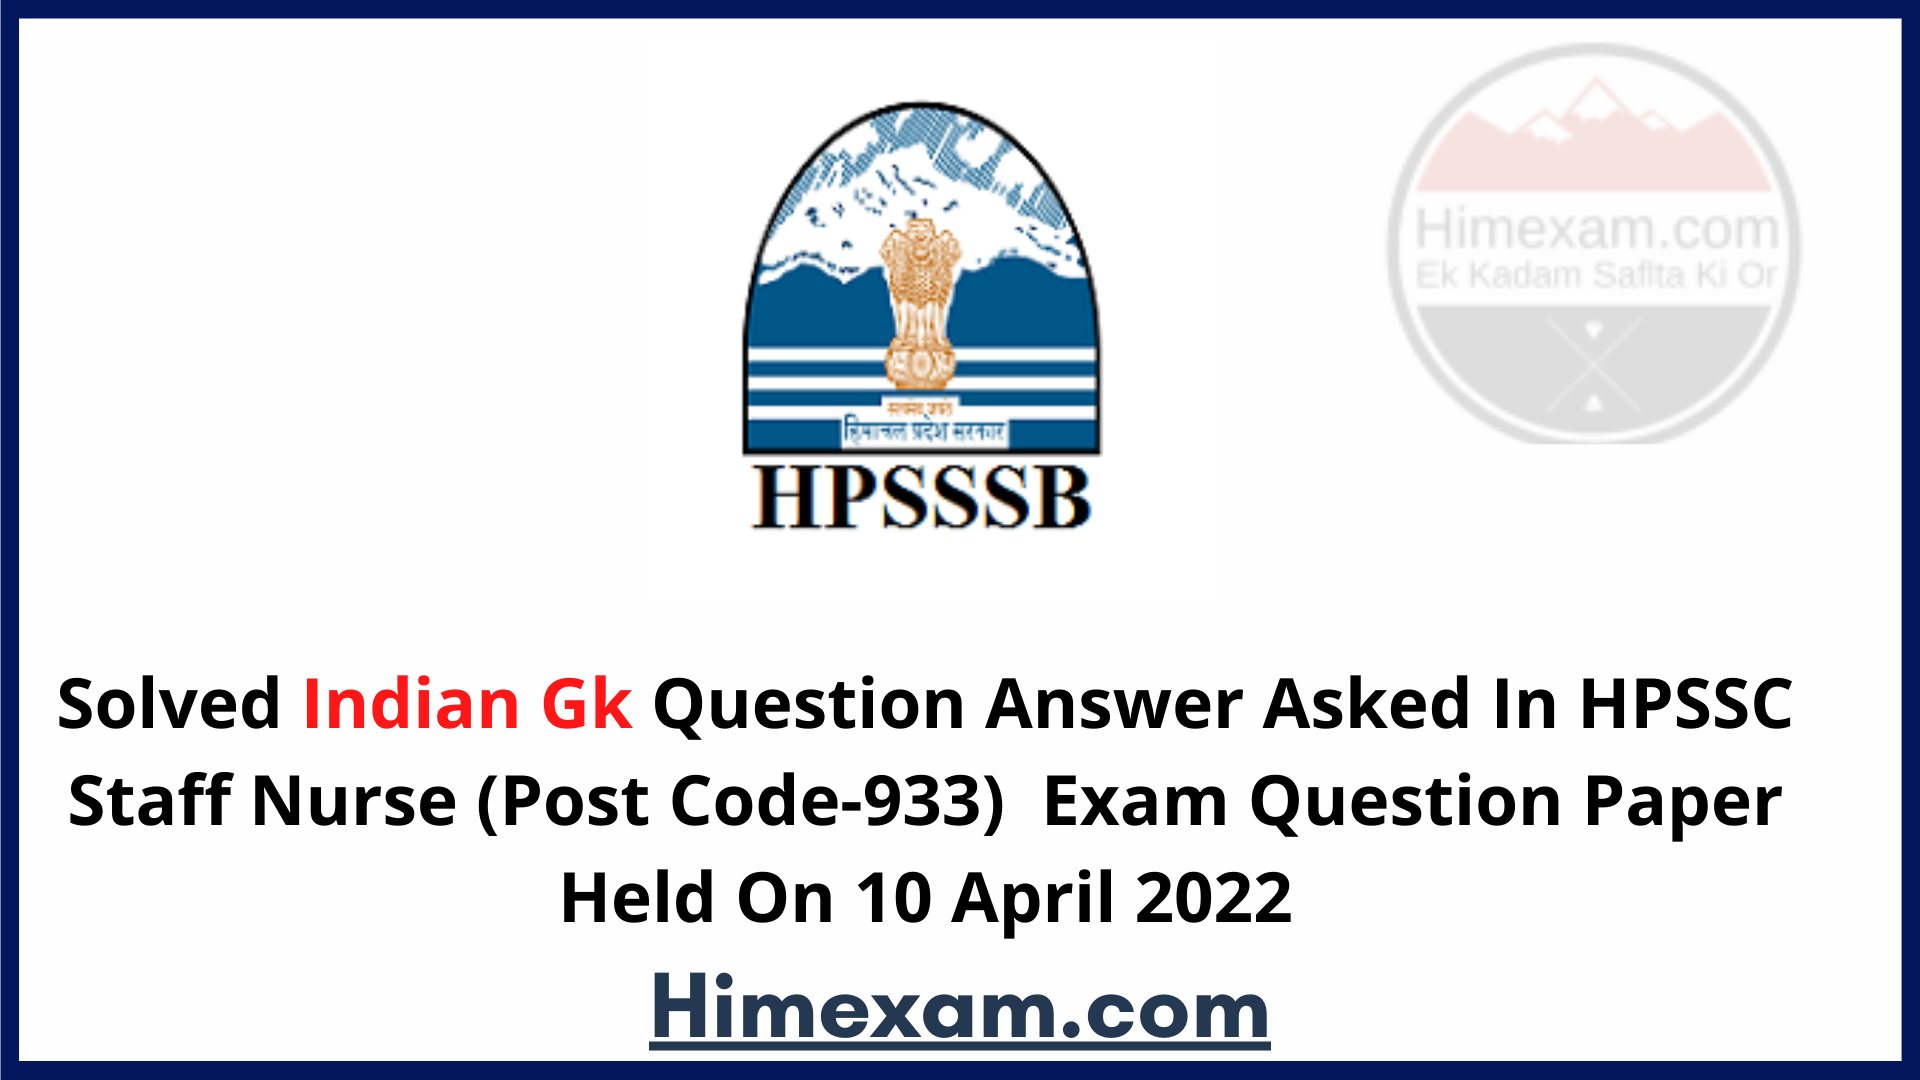 Solved Indian Gk Question Answer Asked In HPSSC Staff Nurse (Post Code-933)  Exam Question Paper Held On 10 April 2022